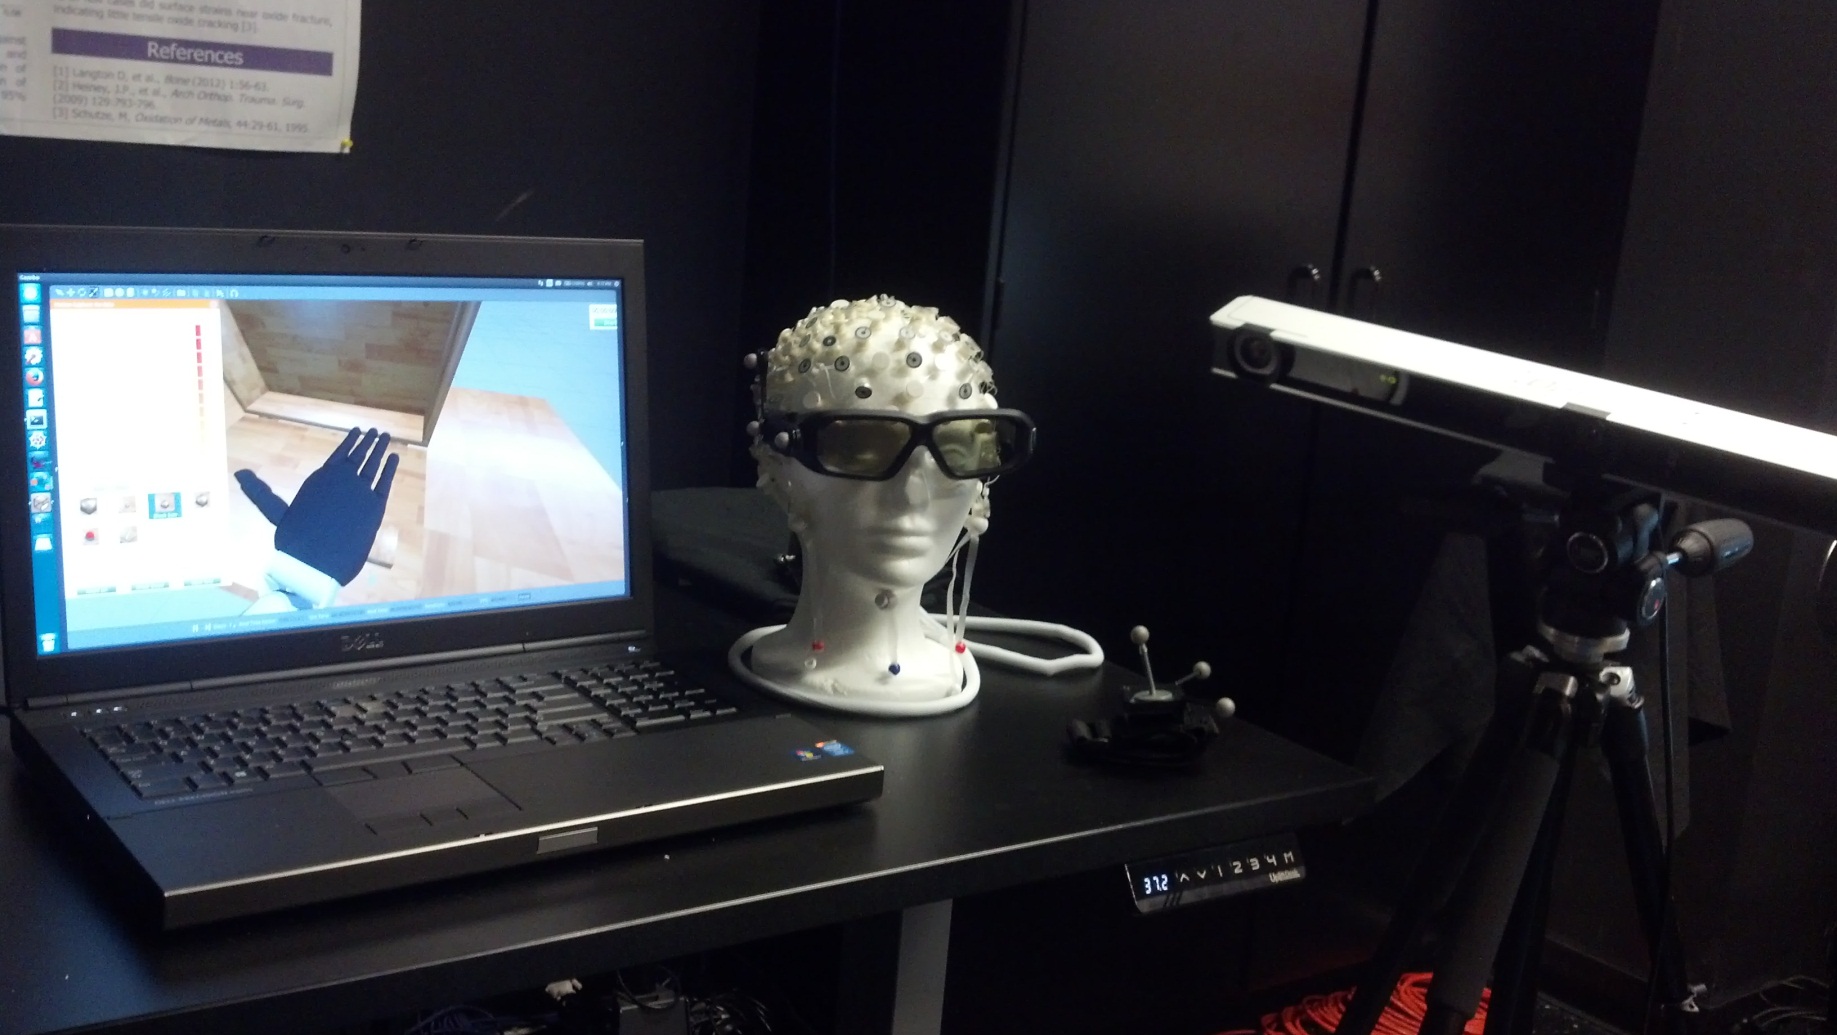 A demonstration of a virtual environment used for testing brain-machine interfaced prosthetics.